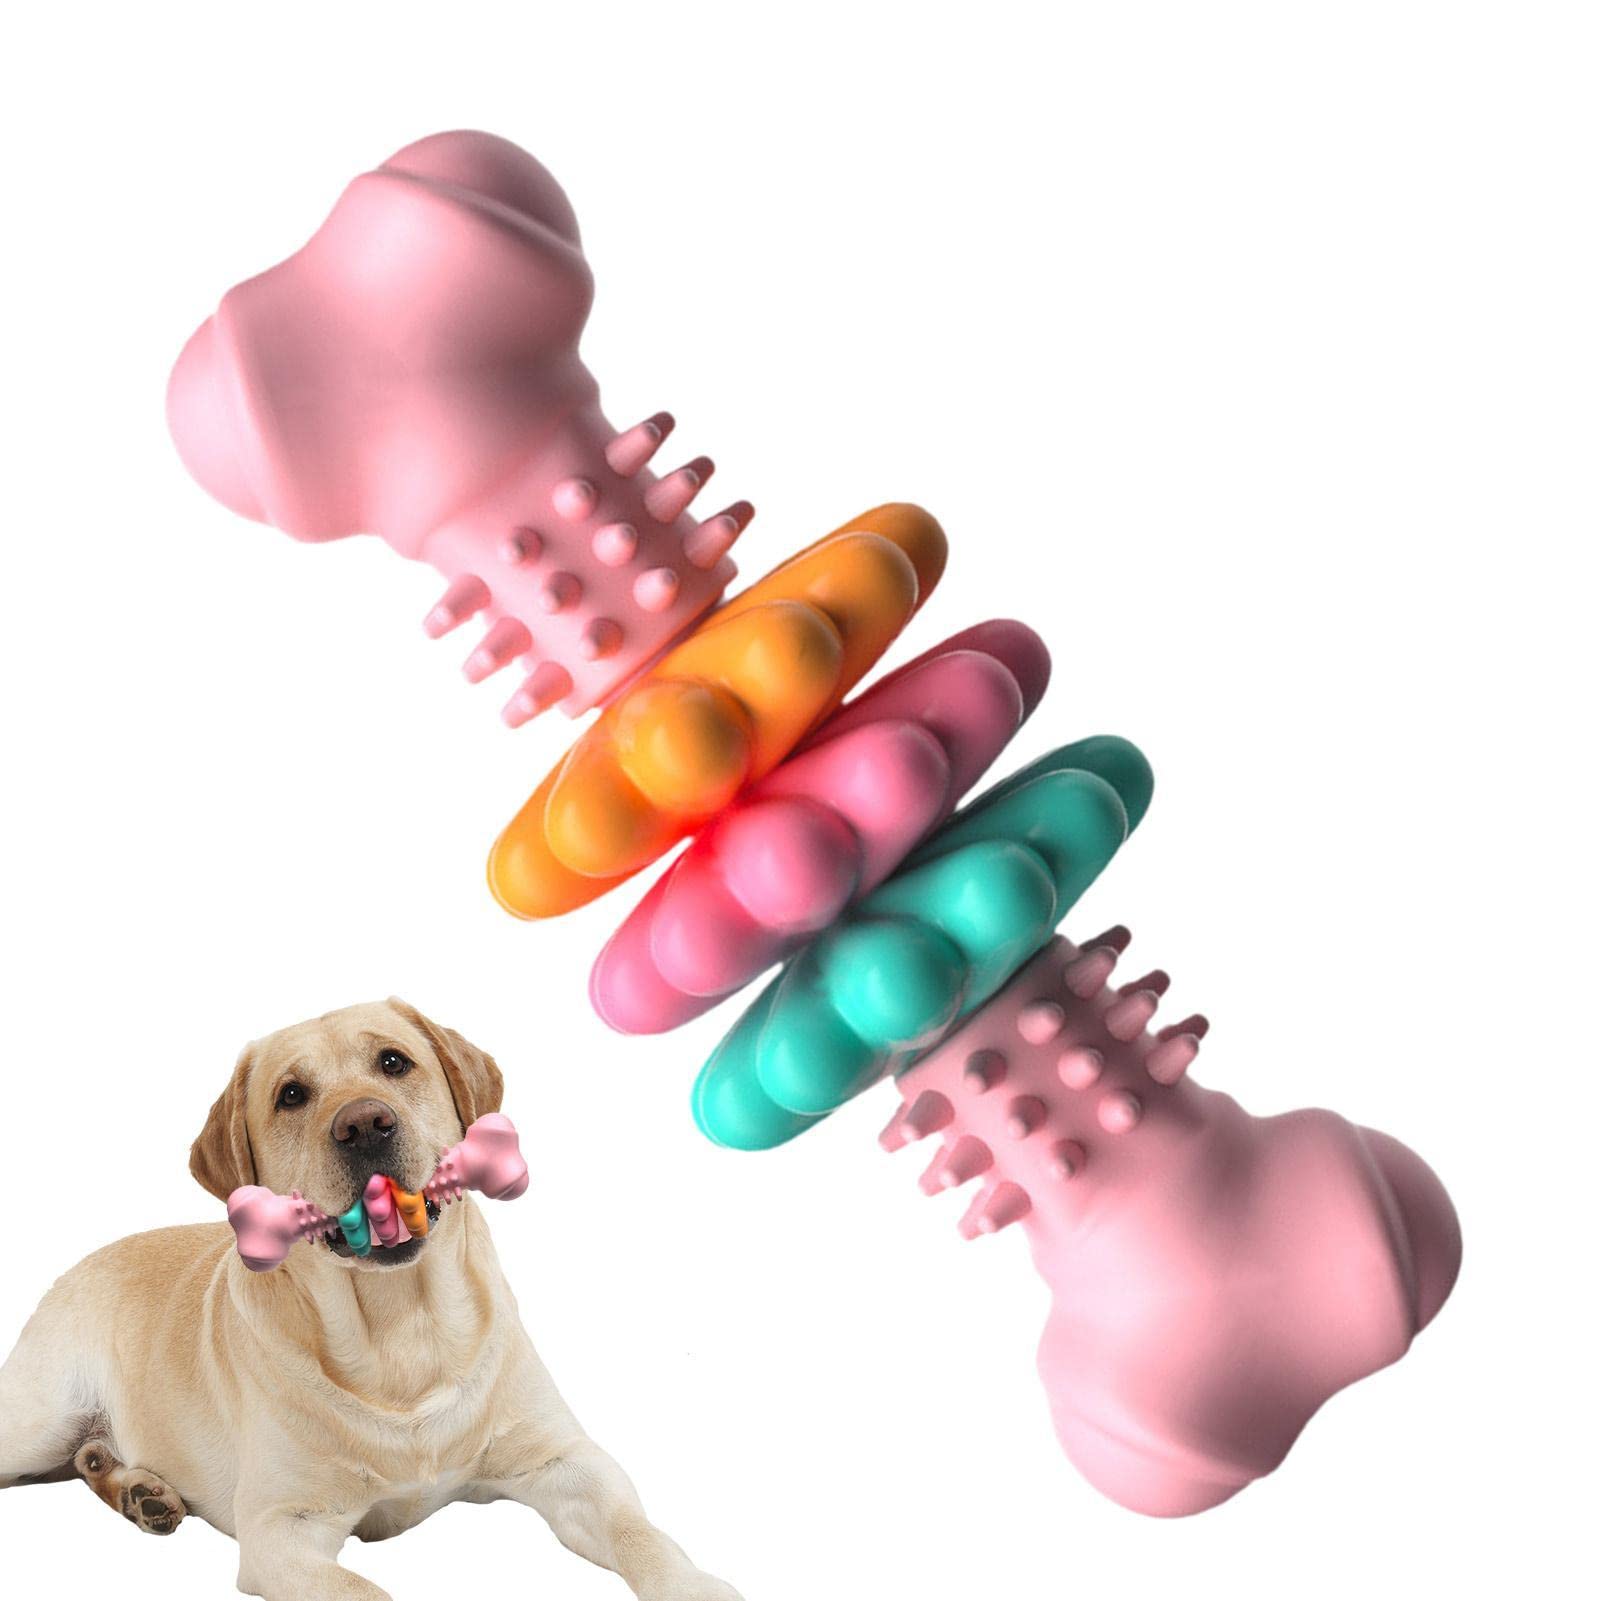 Nobleza Dog Chew Toy, Durable Treat Dispensing Dog Chew Toys, Safe Natural  Rubber Dog Bone Toy for Teething and Teeth Cleaning of Small and Medium